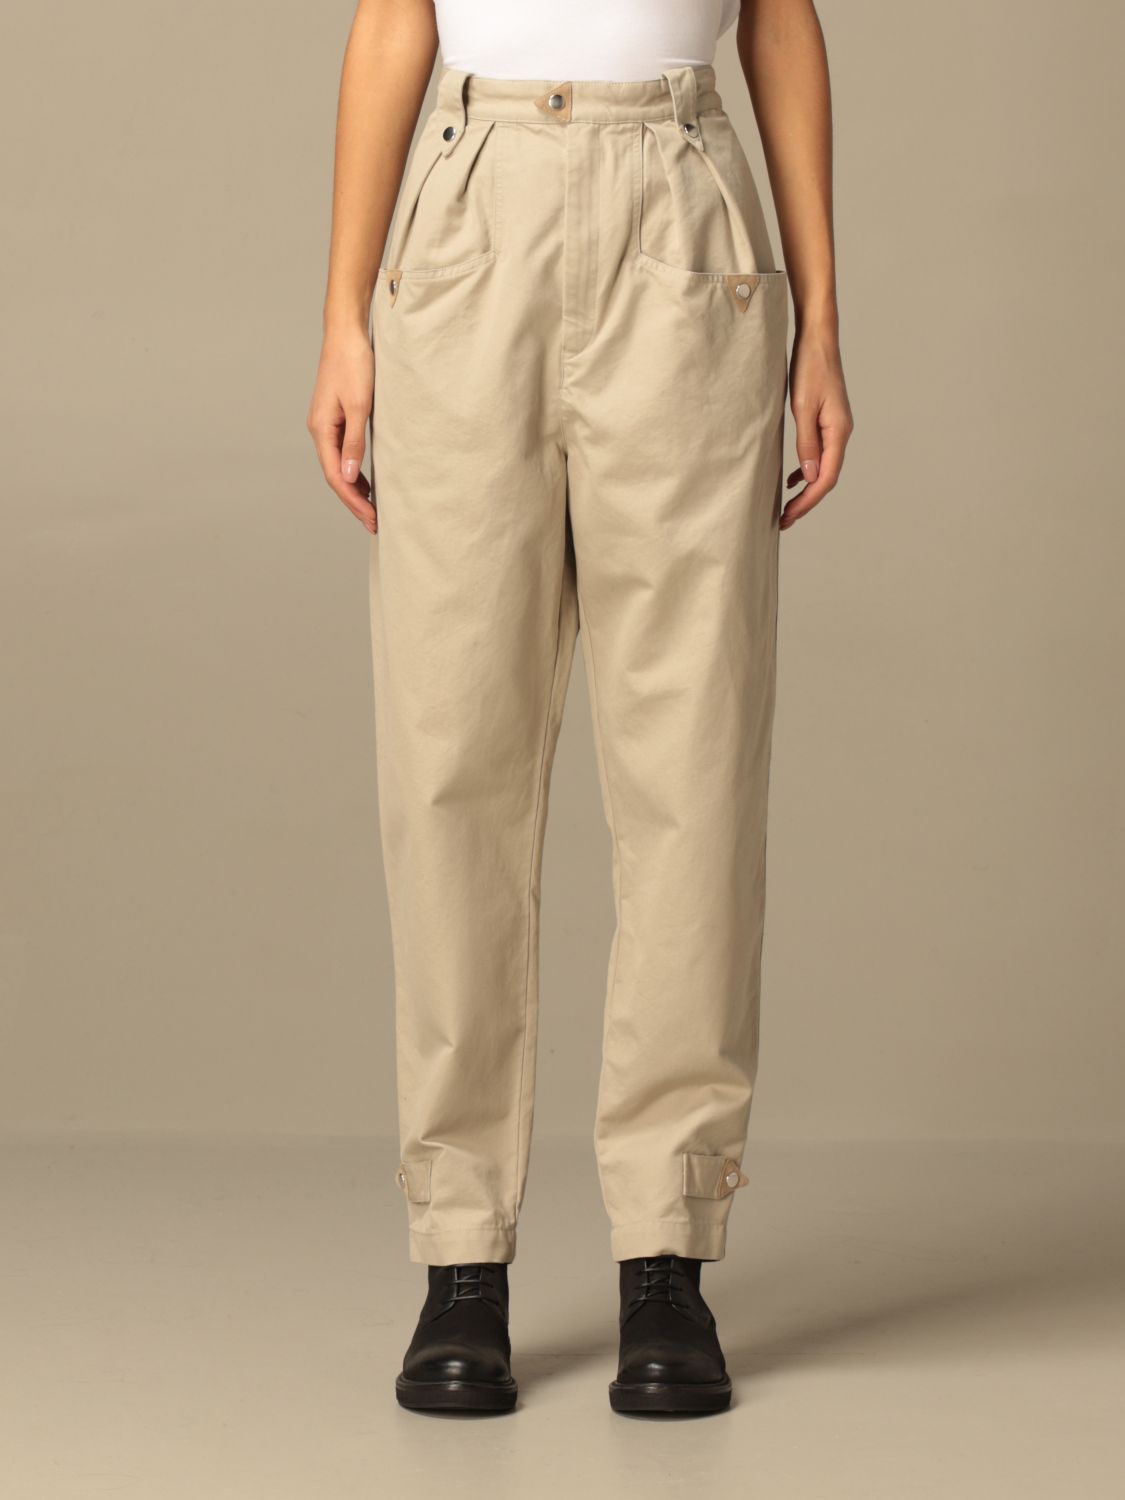 Isabel Marant Outlet: high-waisted trousers Pants Isabel Marant Women Beige | Pants Isabel Marant PA170820A030E